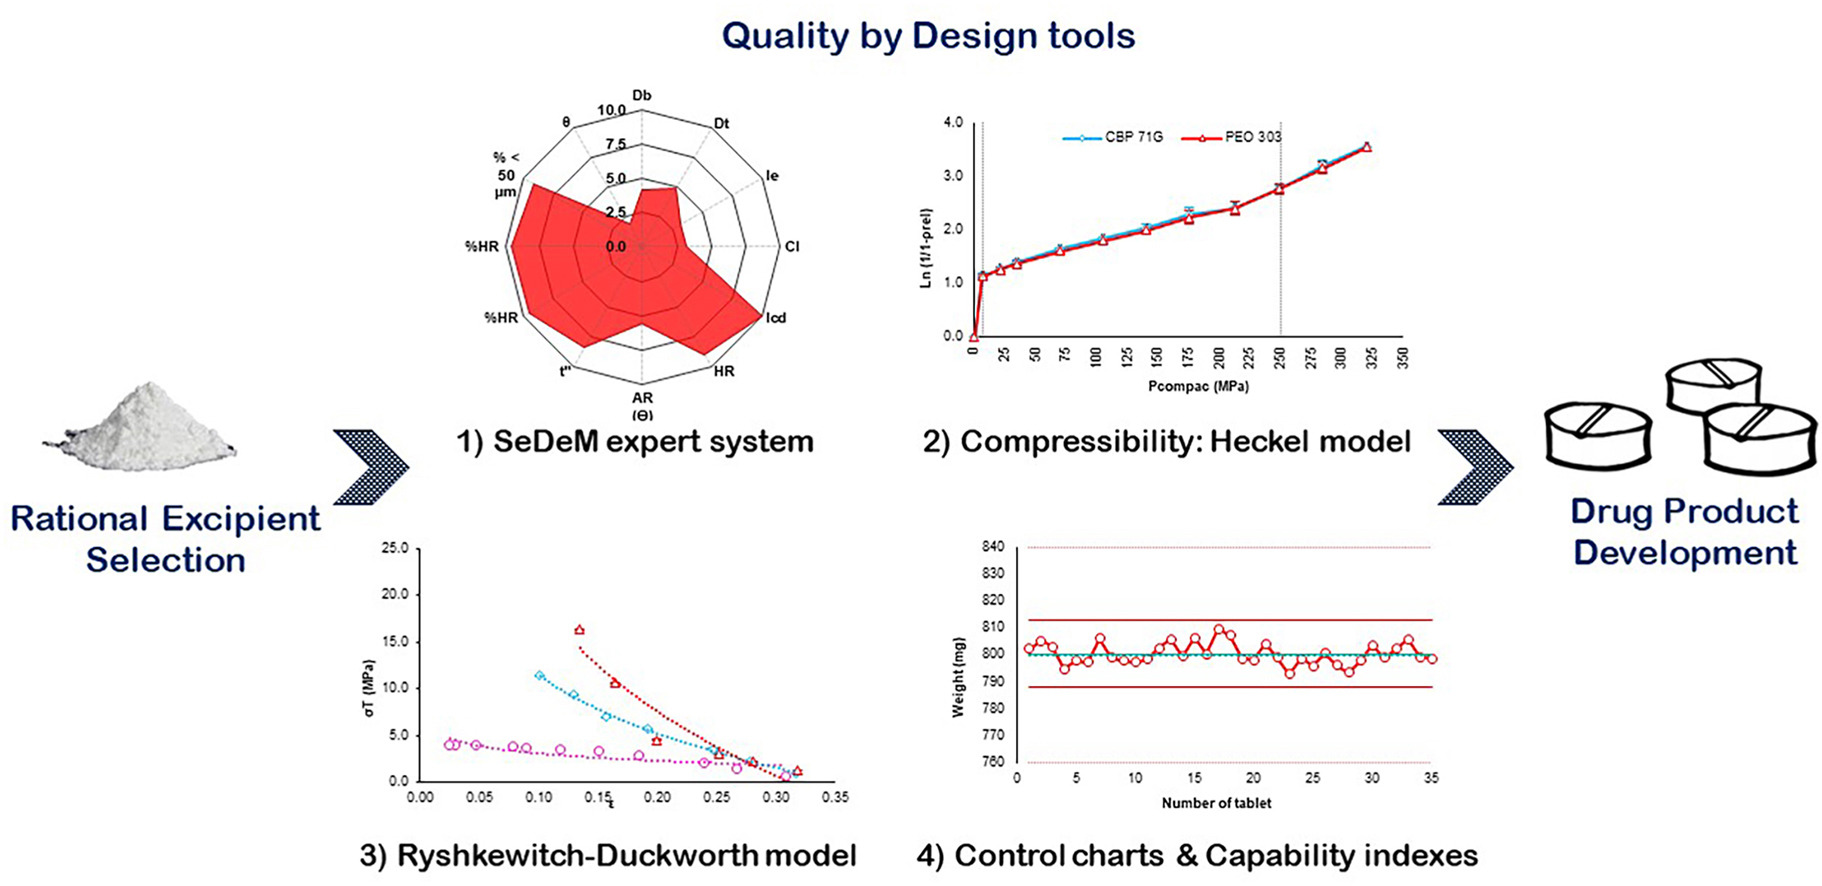 Comparison between polymeric excipients using SeDeM expert system in combination with mathematical modeling and quality control tools